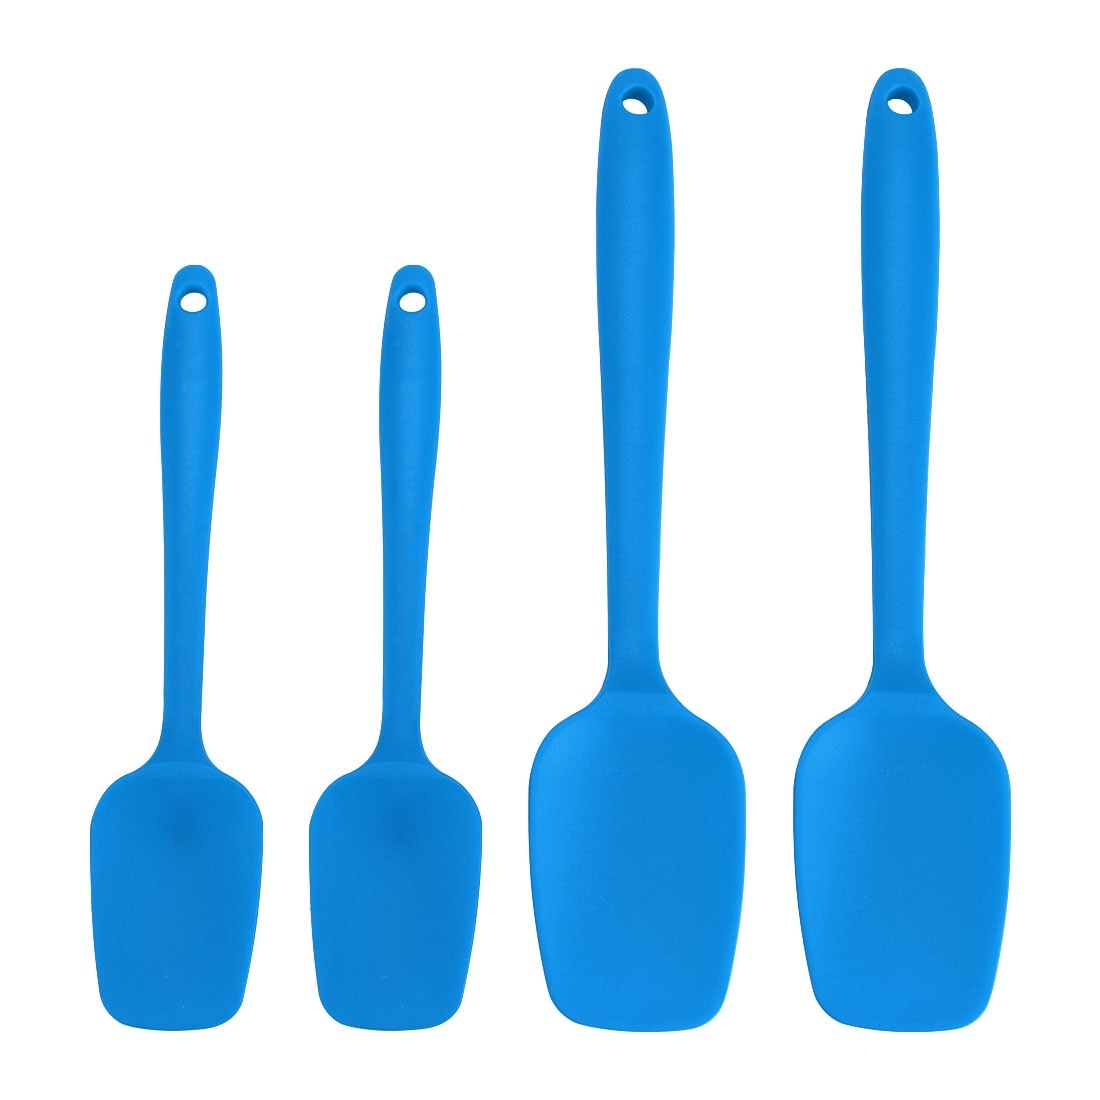 https://ak1.ostkcdn.com/images/products/is/images/direct/ef07c51f47d59fecbab50f081b5f8c34dc2f5bcb/4-Pcs-Silicone-Non-Sticky-Spatula-Heat-Resistant-Non-scratch-Turners.jpg